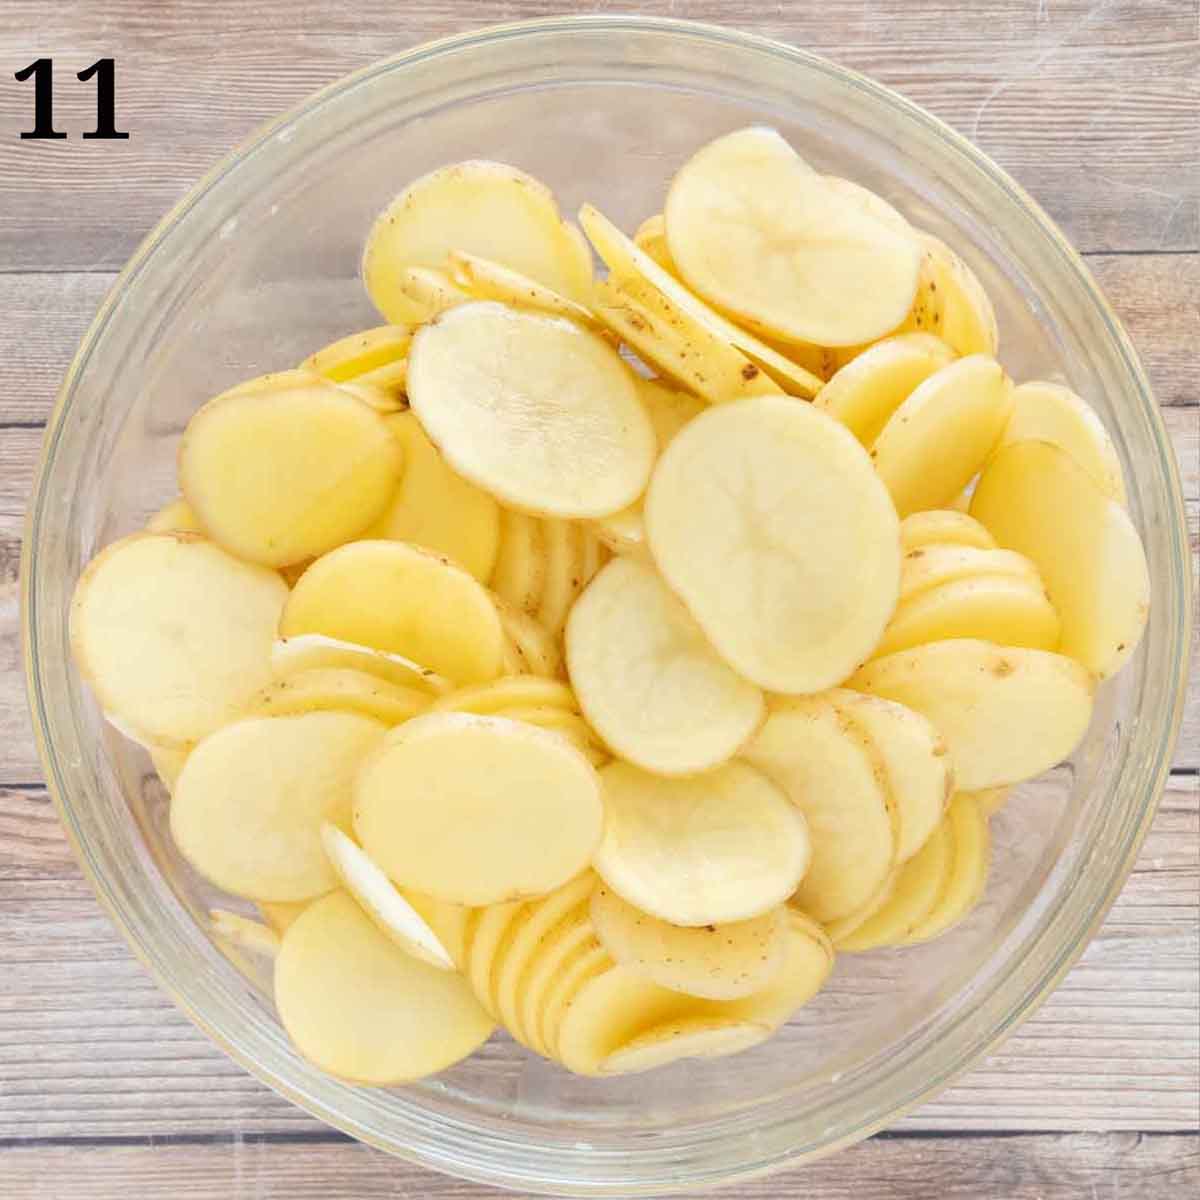 Sliced potatoes in a glass bowl.